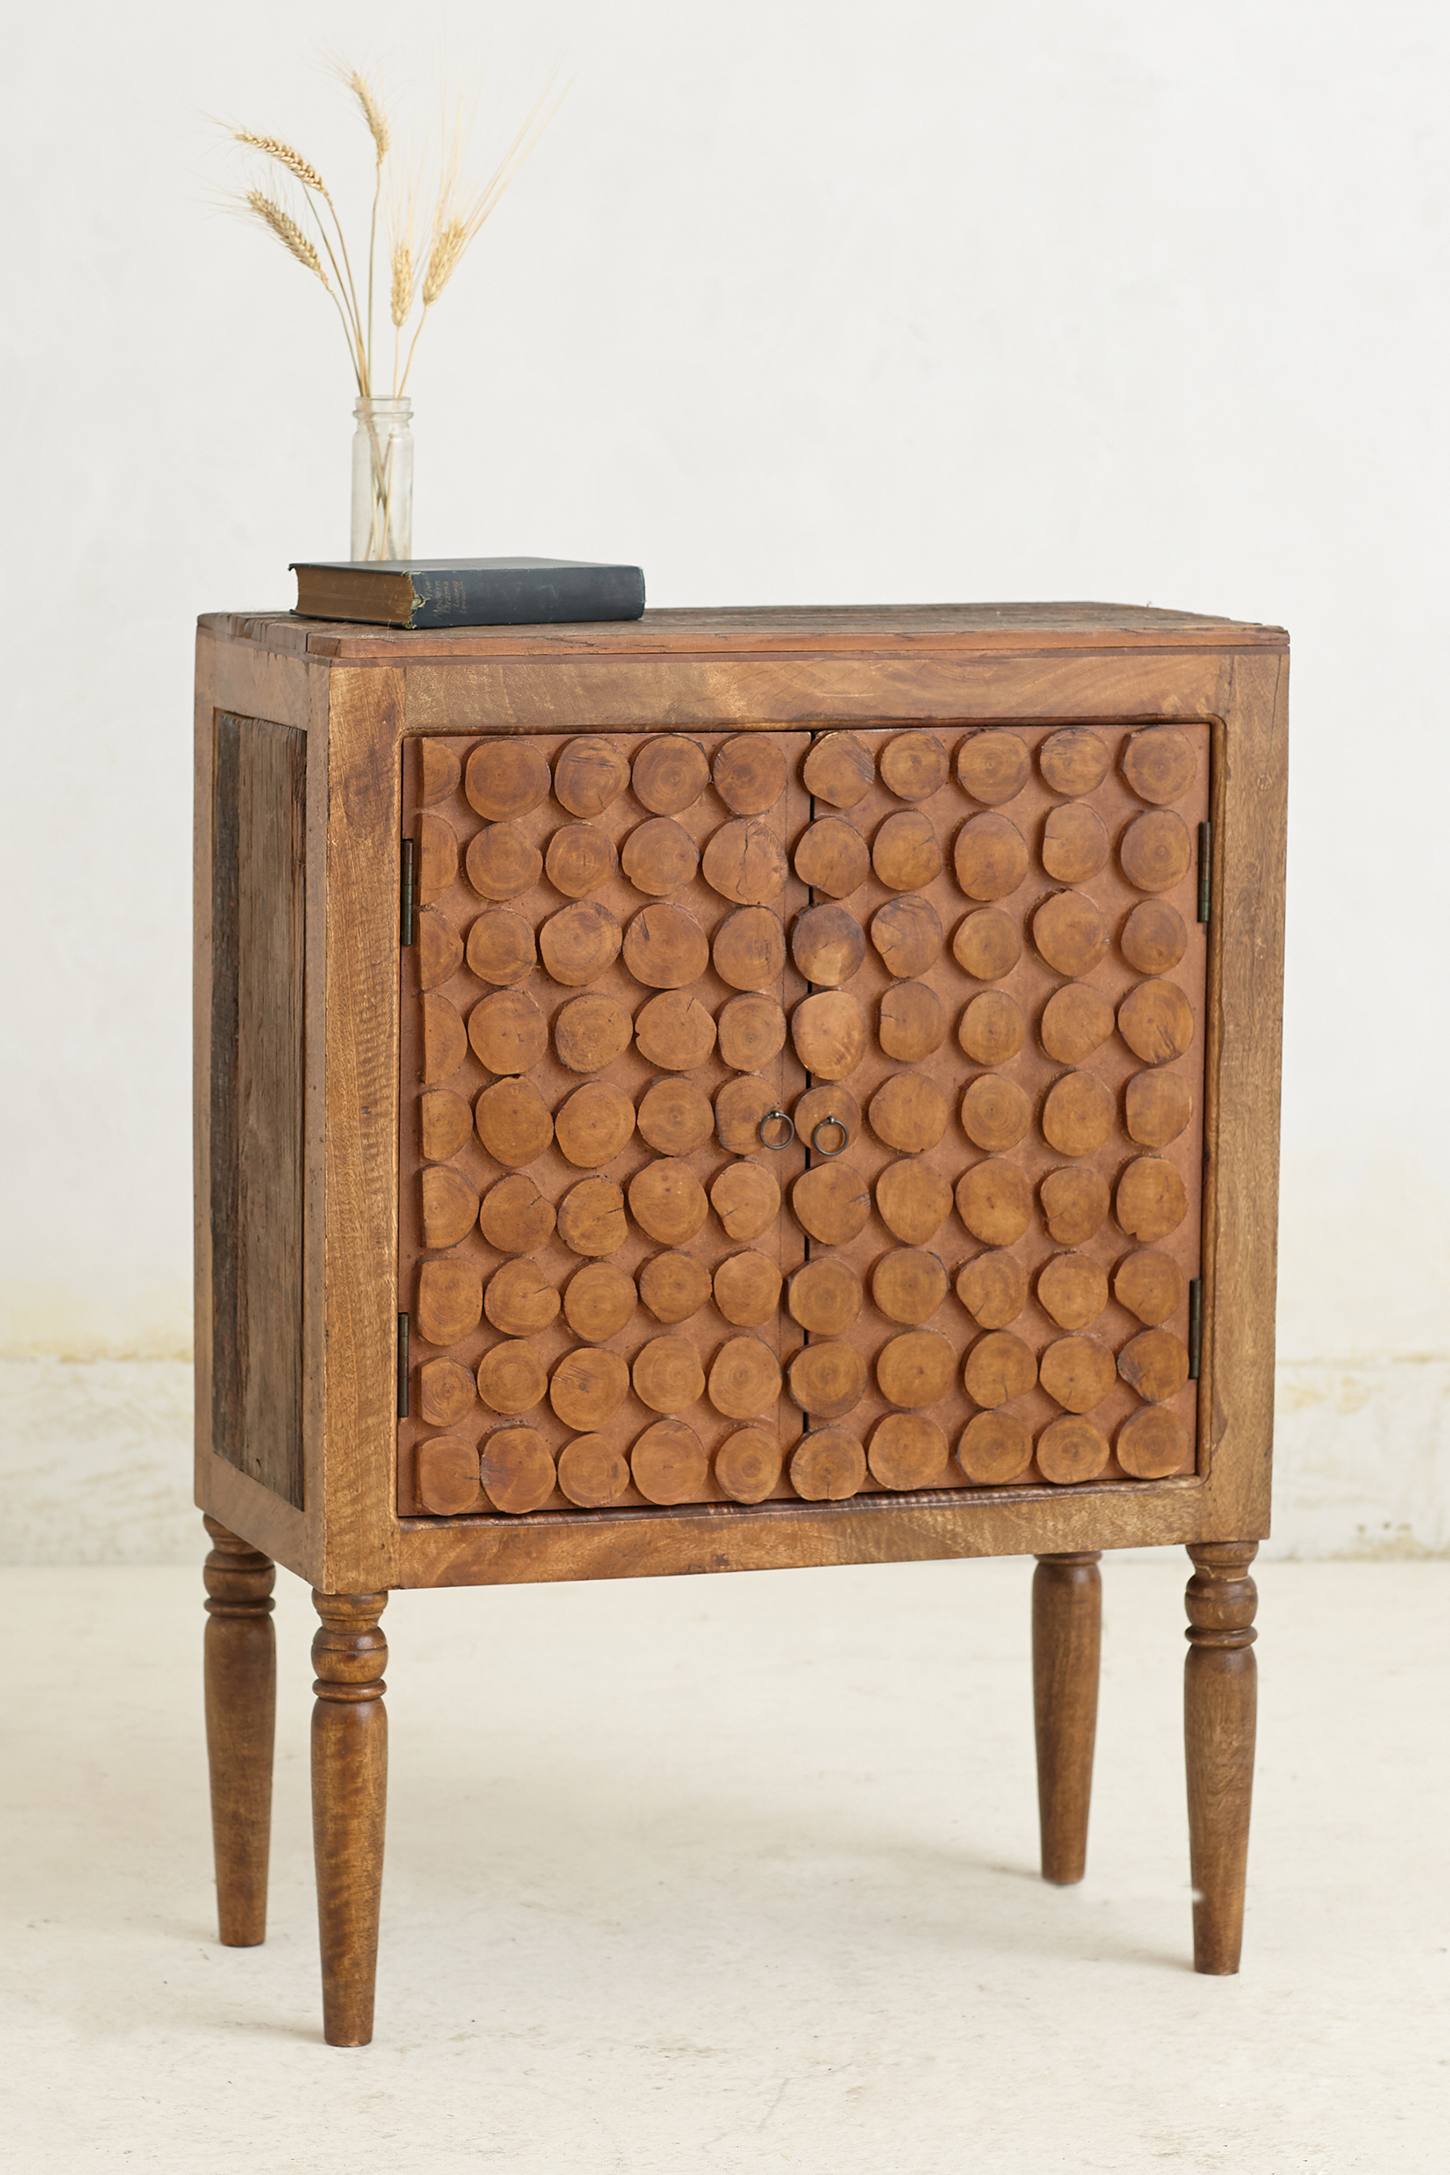 Tree Rings Cabinet - anthro...